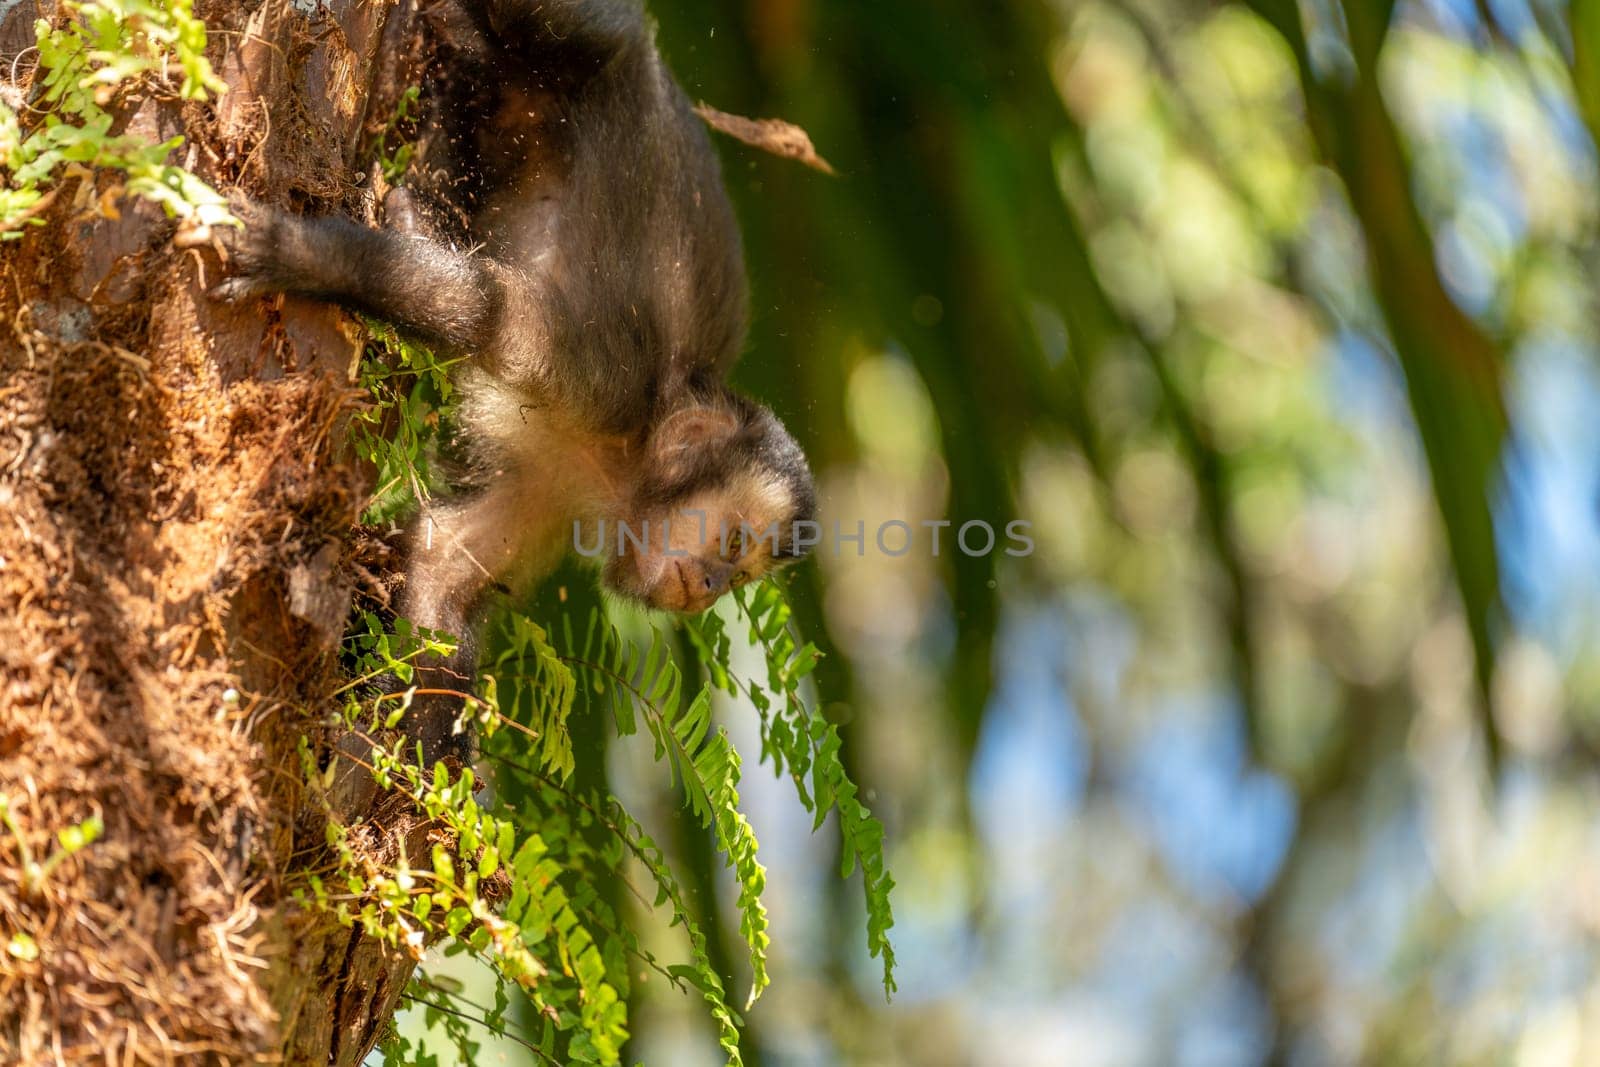 Capuchin monkey forages in a verdant forest, embodying wilderness.